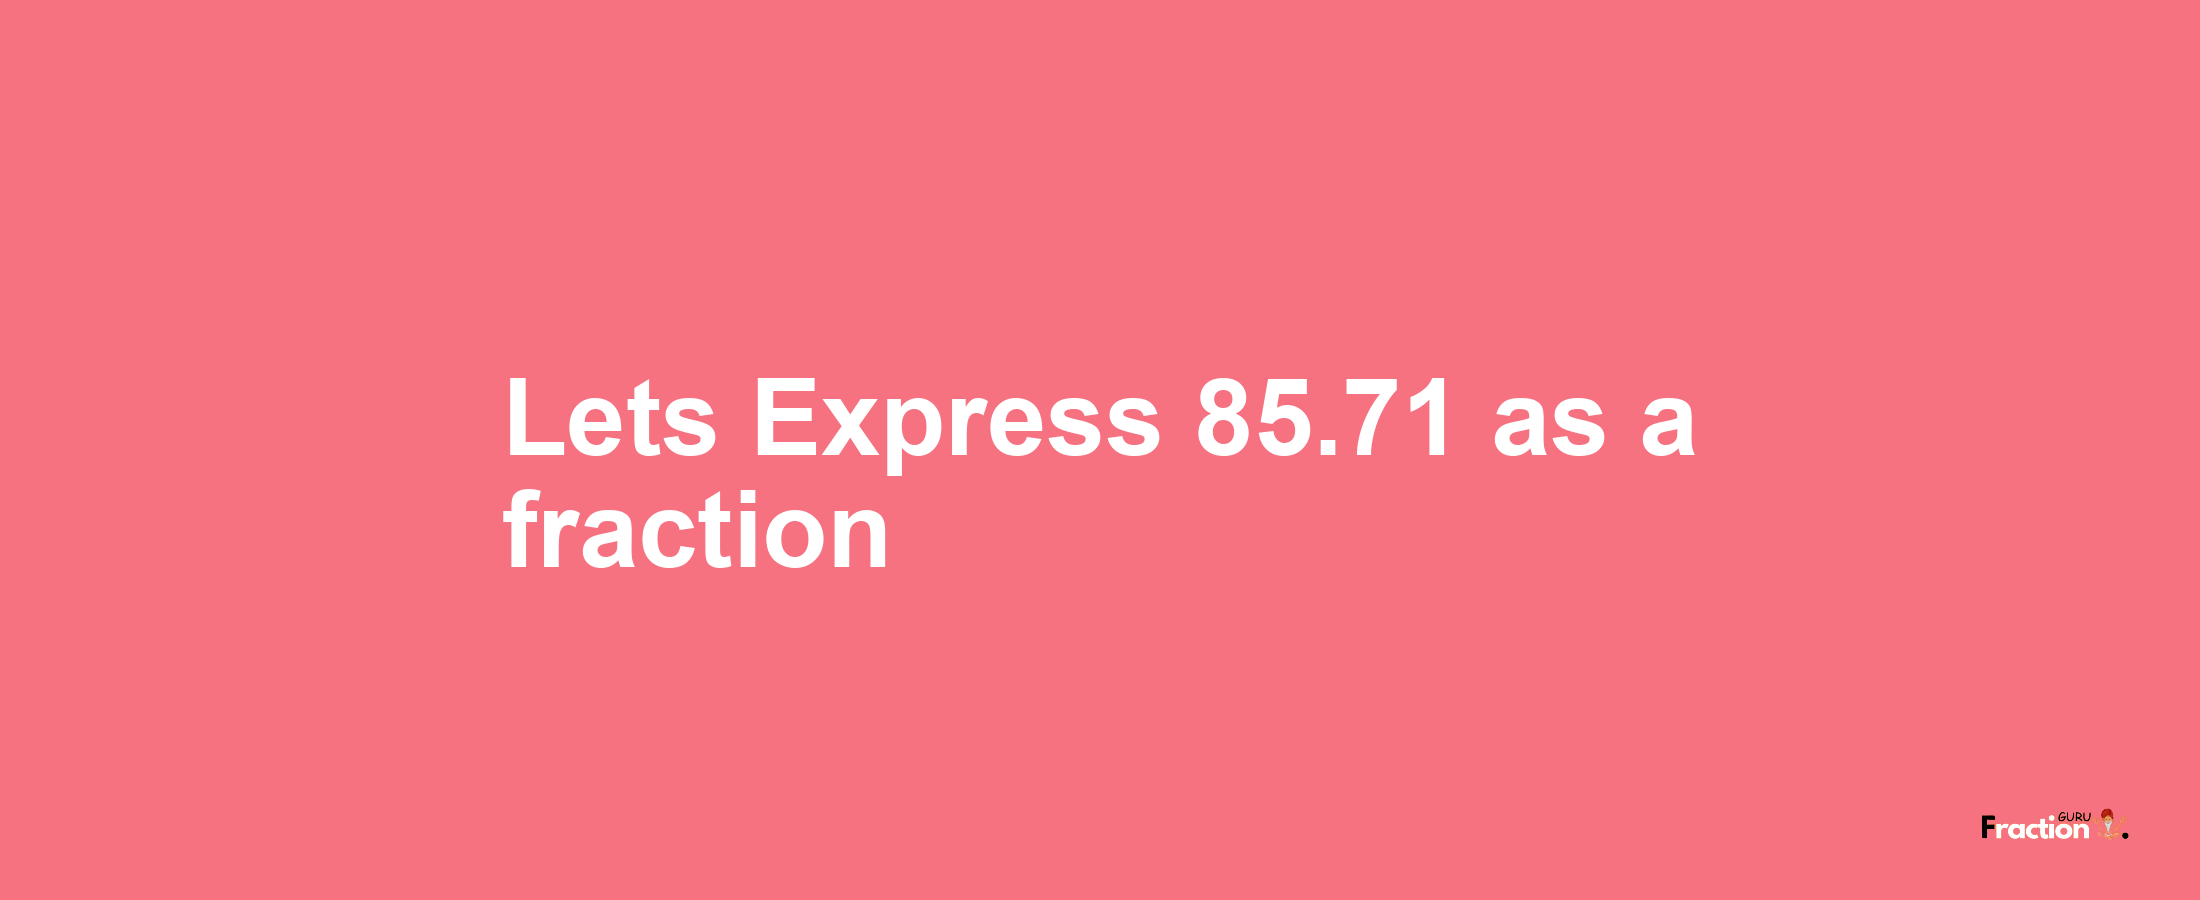 Lets Express 85.71 as afraction